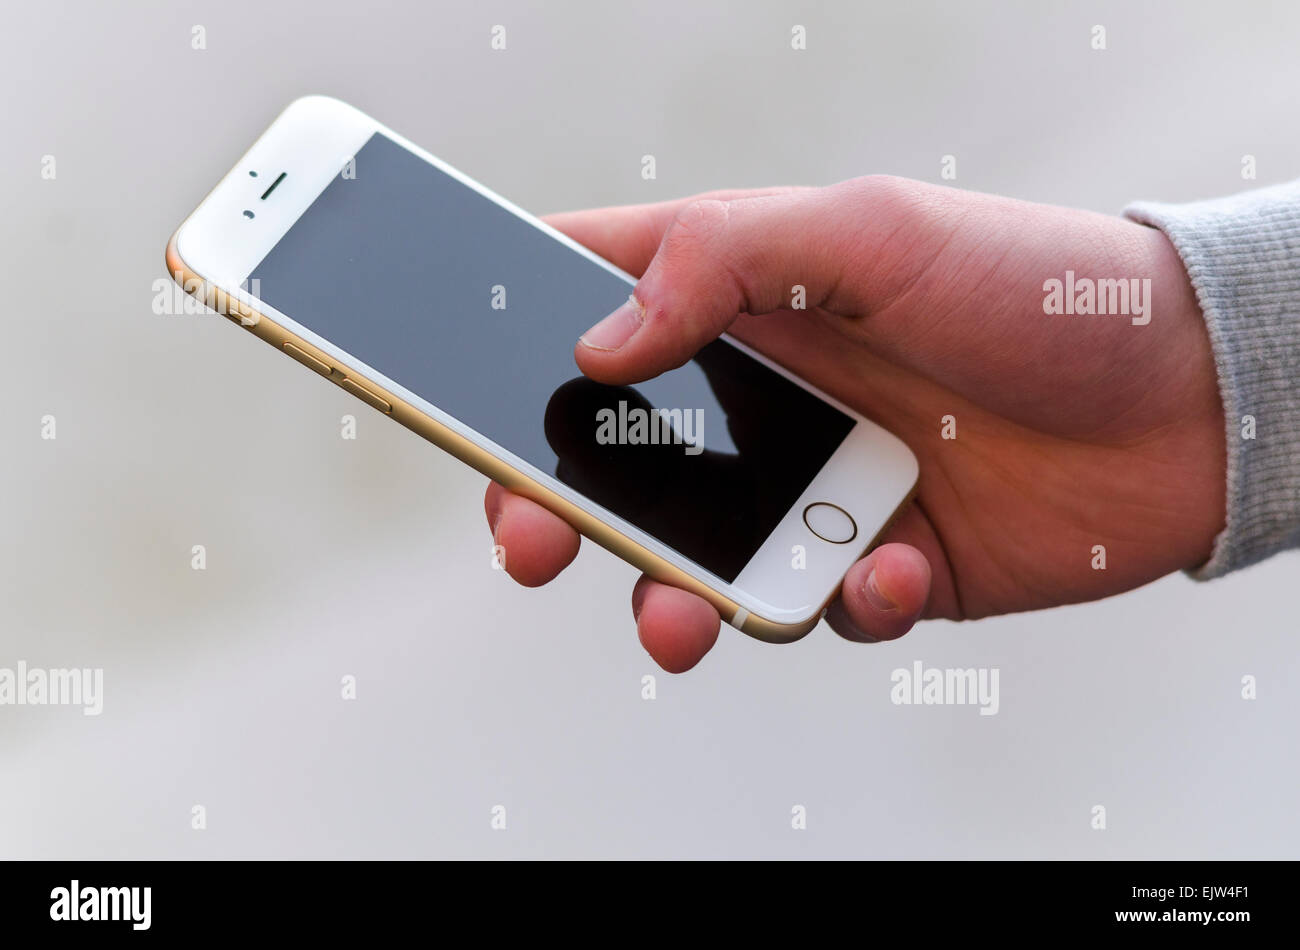 Person Holding Apple Iphone 6 Smartphone Stock Photo